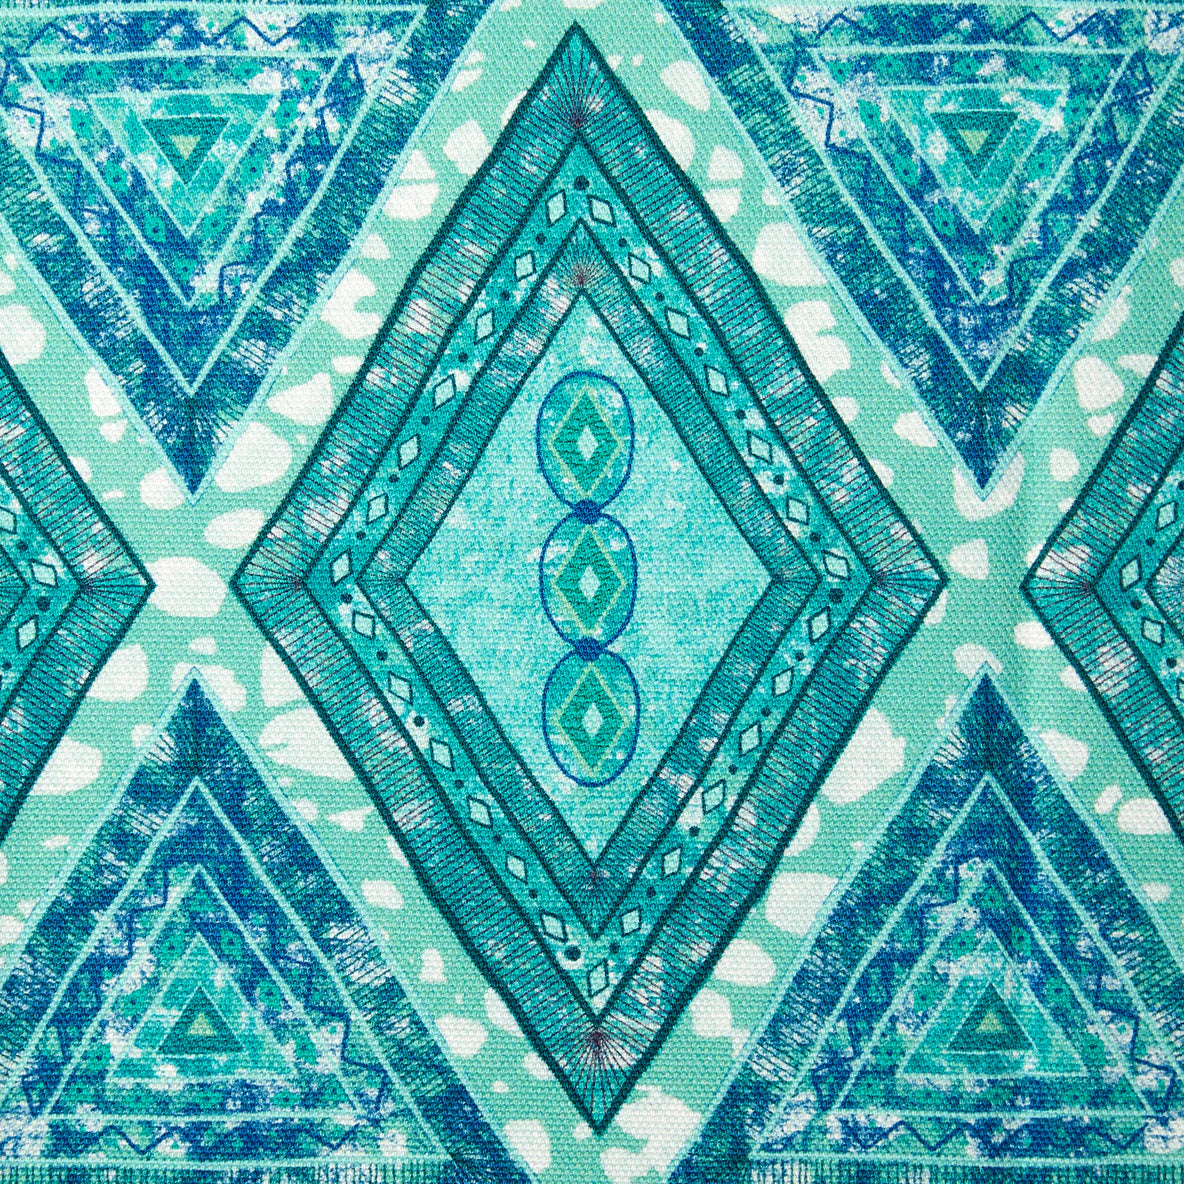 Detail of fabric in an intricate diamond grid pattern in shades of blue and turquoise.